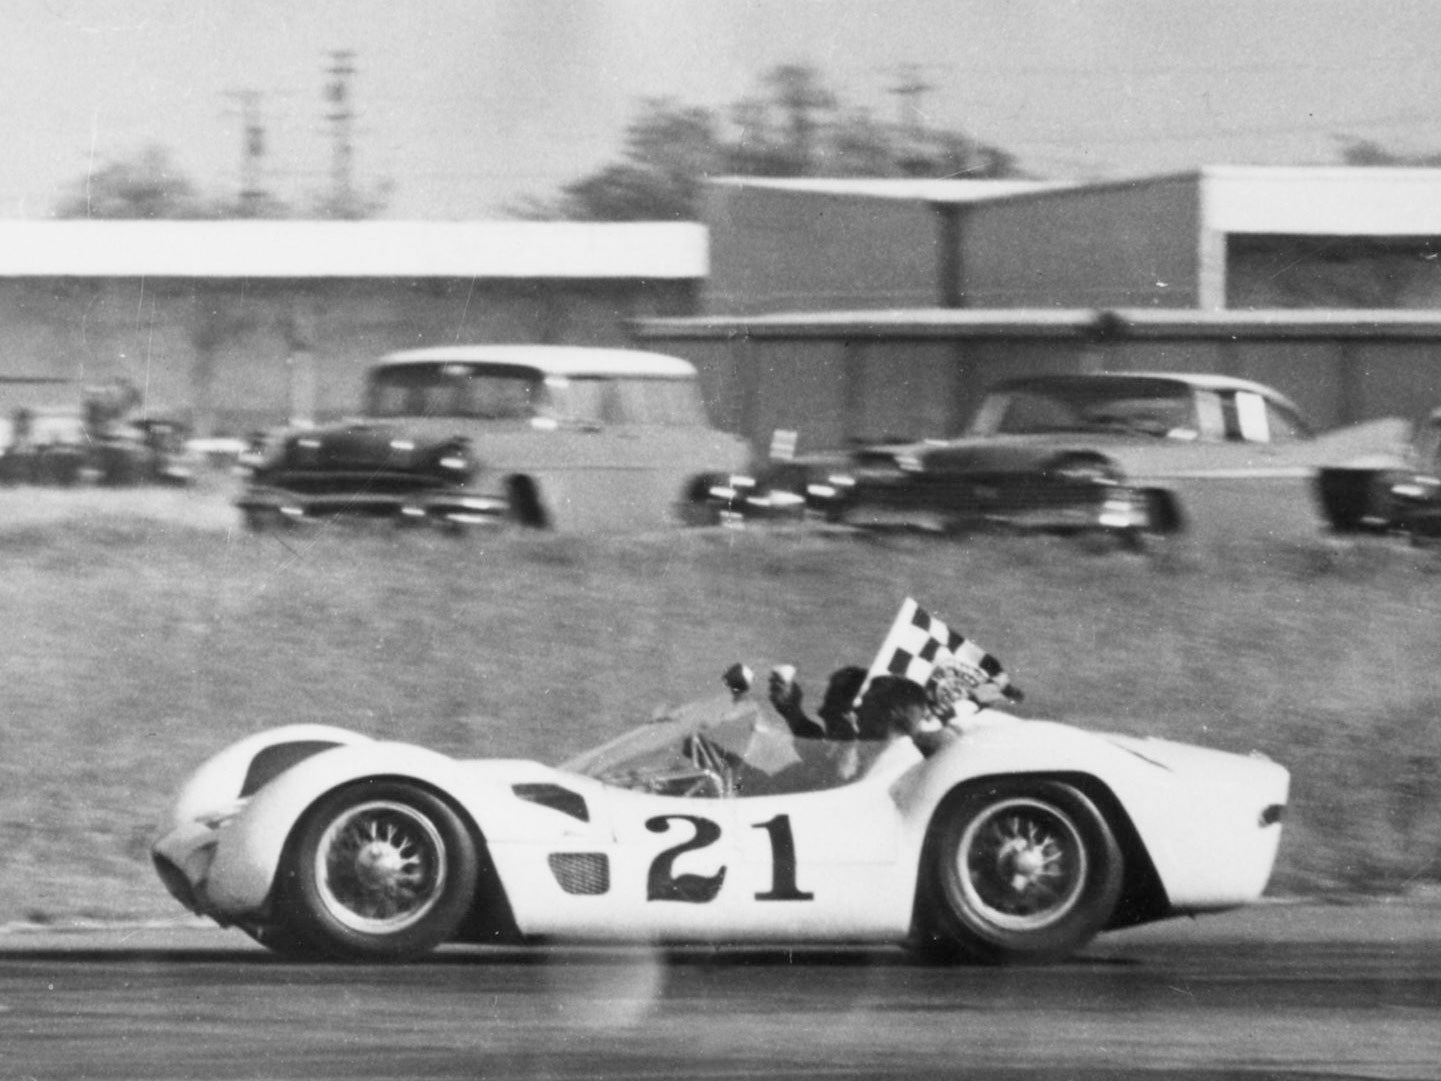 Maserati Tipo 60, debut and victory at Rouen on 12 July 1959